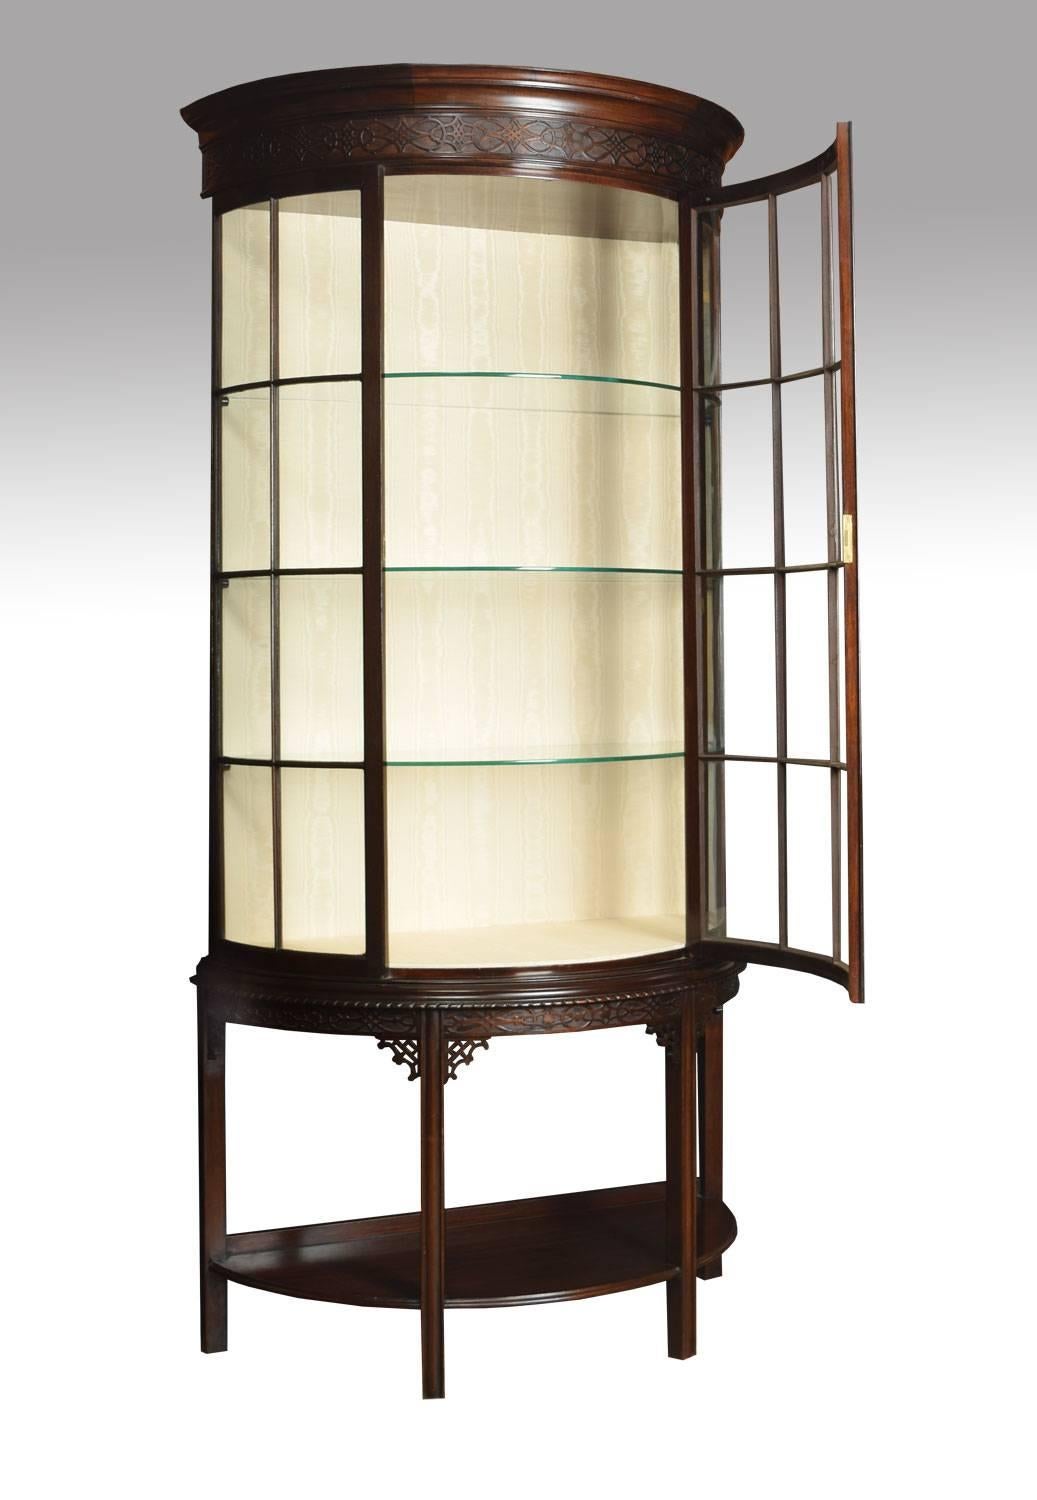 Edwardian mahogany display cabinet the blind fret moulded top above large glazed door opening to reveal three glazed shelves. All raised up on square tapering legs united by under tier.

Dimensions:
Height 74.5 inches
Width 37 inches
Depth 19